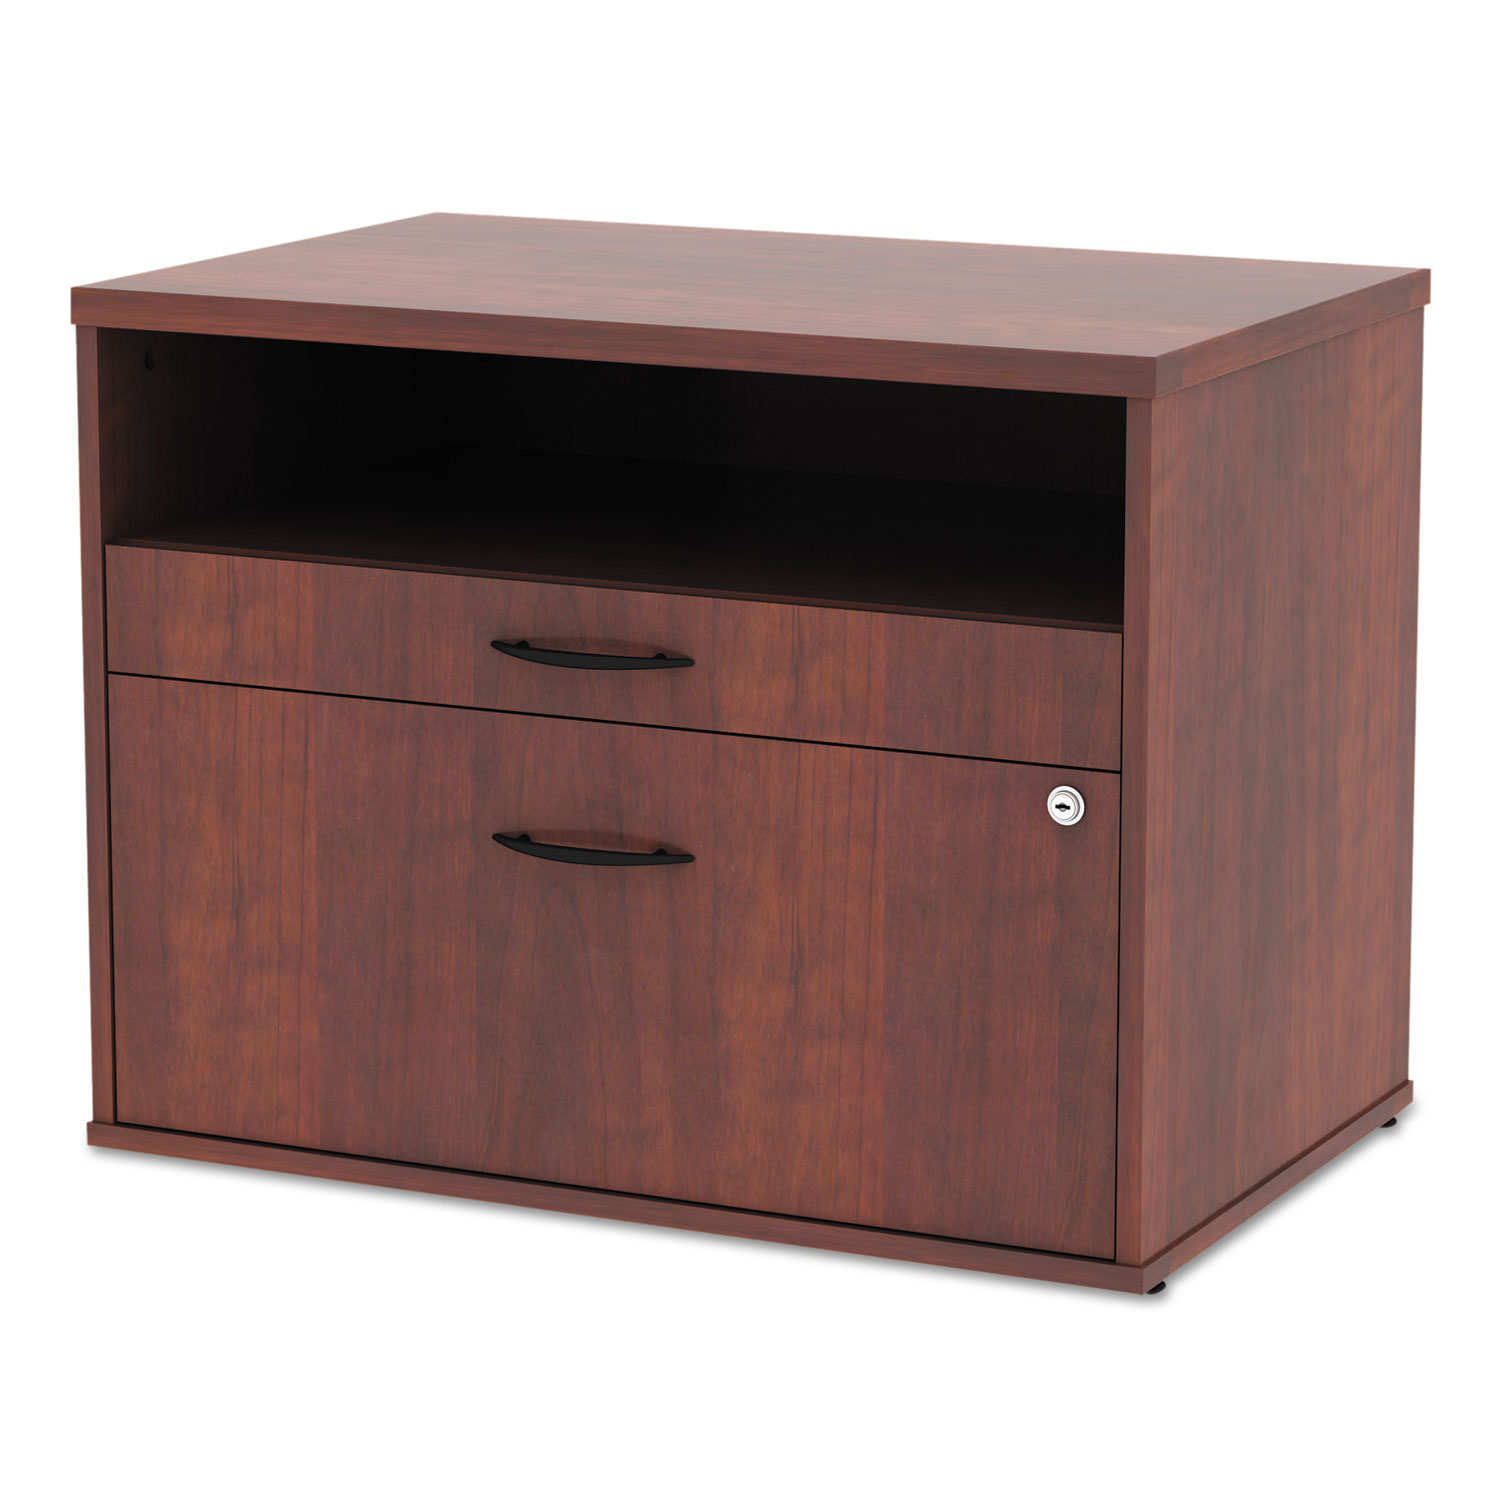 Alera Open Office Series Low File Cab Cred, 29 1/2x19 1/8x22 7/8, Med. Cherry